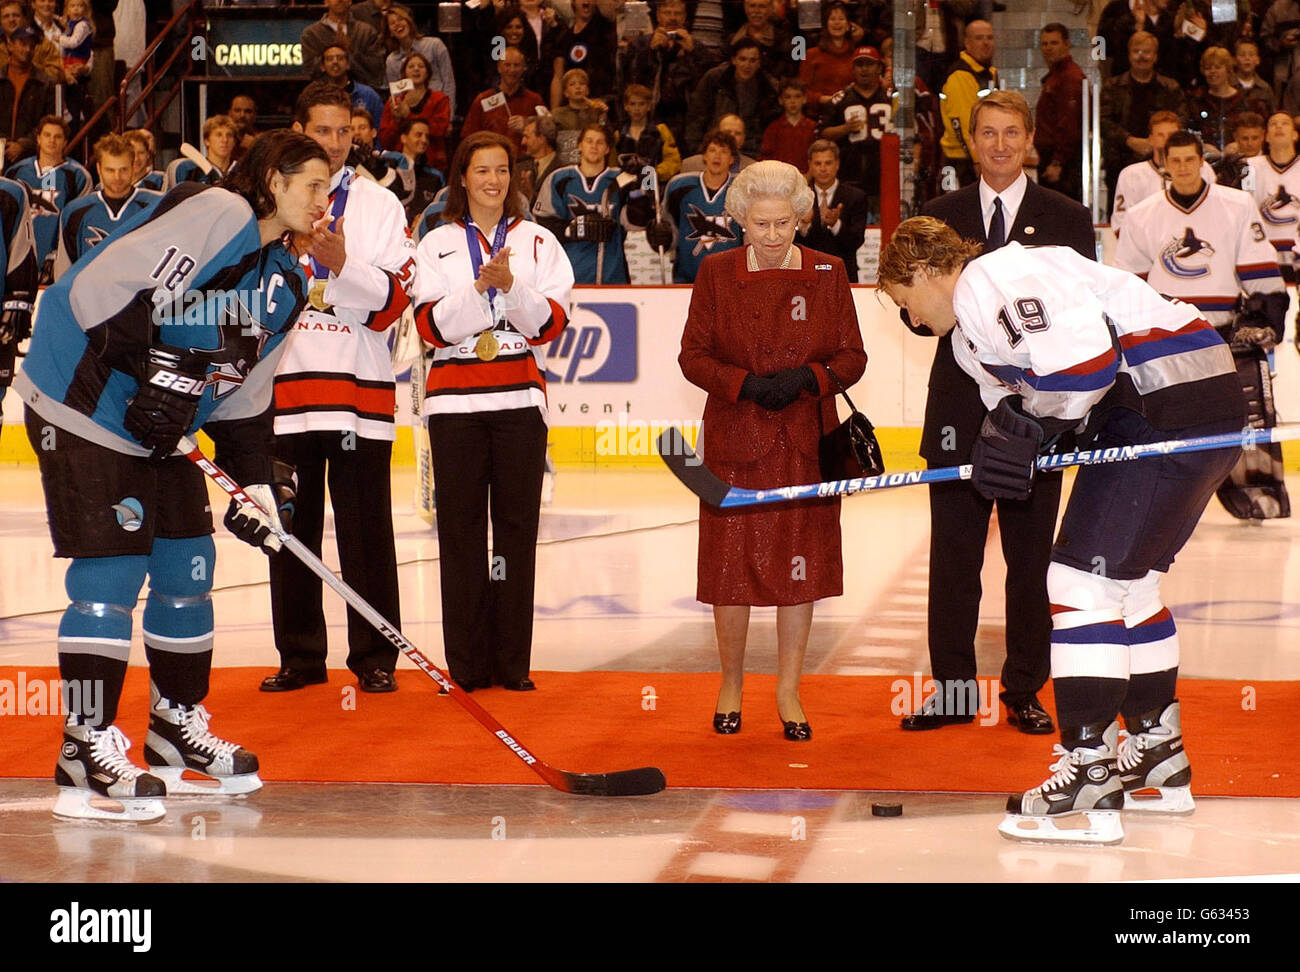 Britain's Queen Elizabeth II starts an ice hockey game between San Jose Sharks and Vancouver Canucks in Vancouver, Canada, during her two week Golden Jubilee tour of the country. *...Earlier, The Queen, and her husband, the Duke of Edinburgh, went to church at Christ Church Cathedral in Victoria followed by lunch at the Fairmont Empress Hotel where the royal couple were greeted by the Pipes and Drums of the Canadian Scottish Regiment. Stock Photo